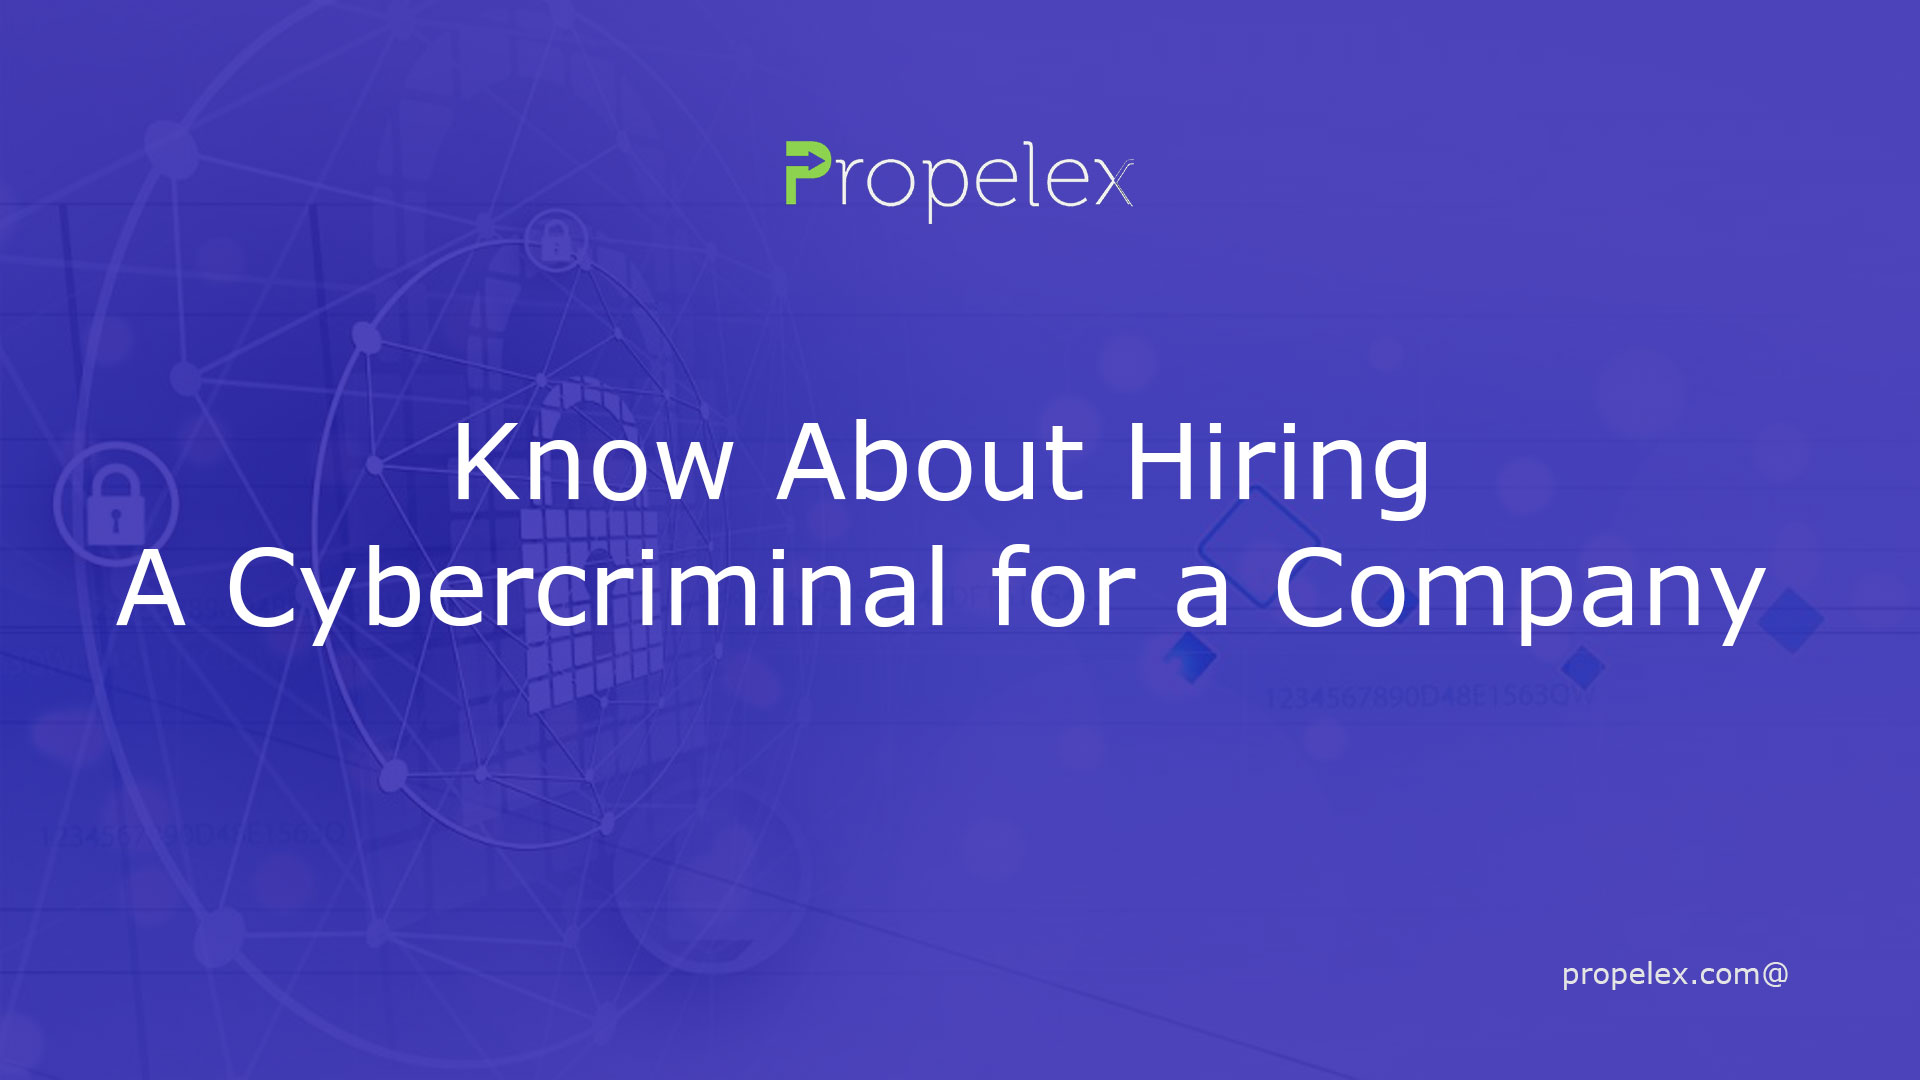 Know About Hiring a Cybercriminal for a Company